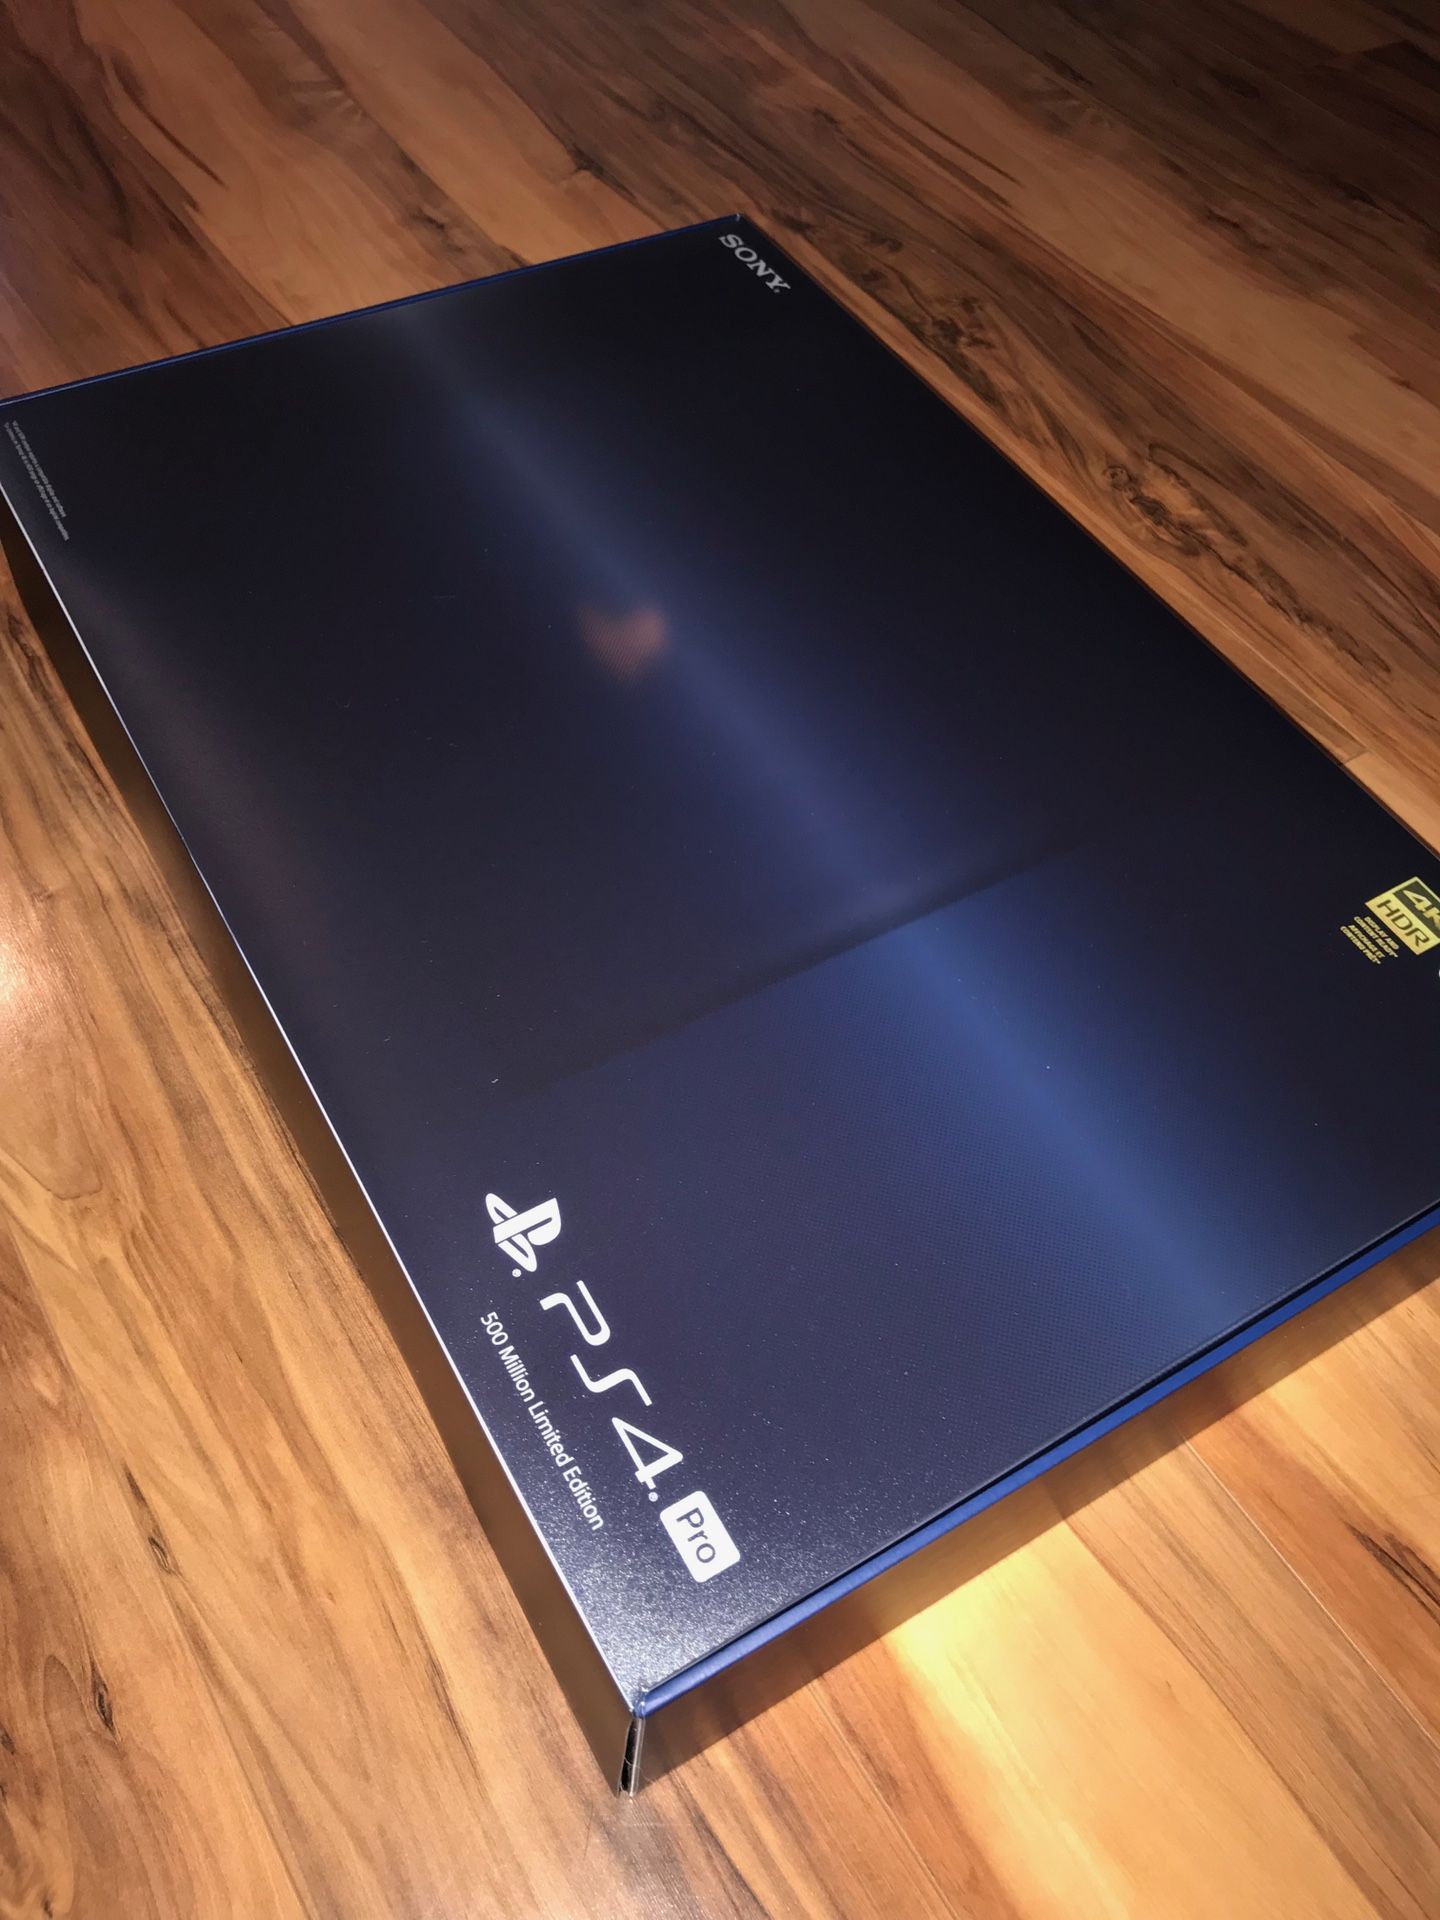 PS4 Pro Limited Edition!